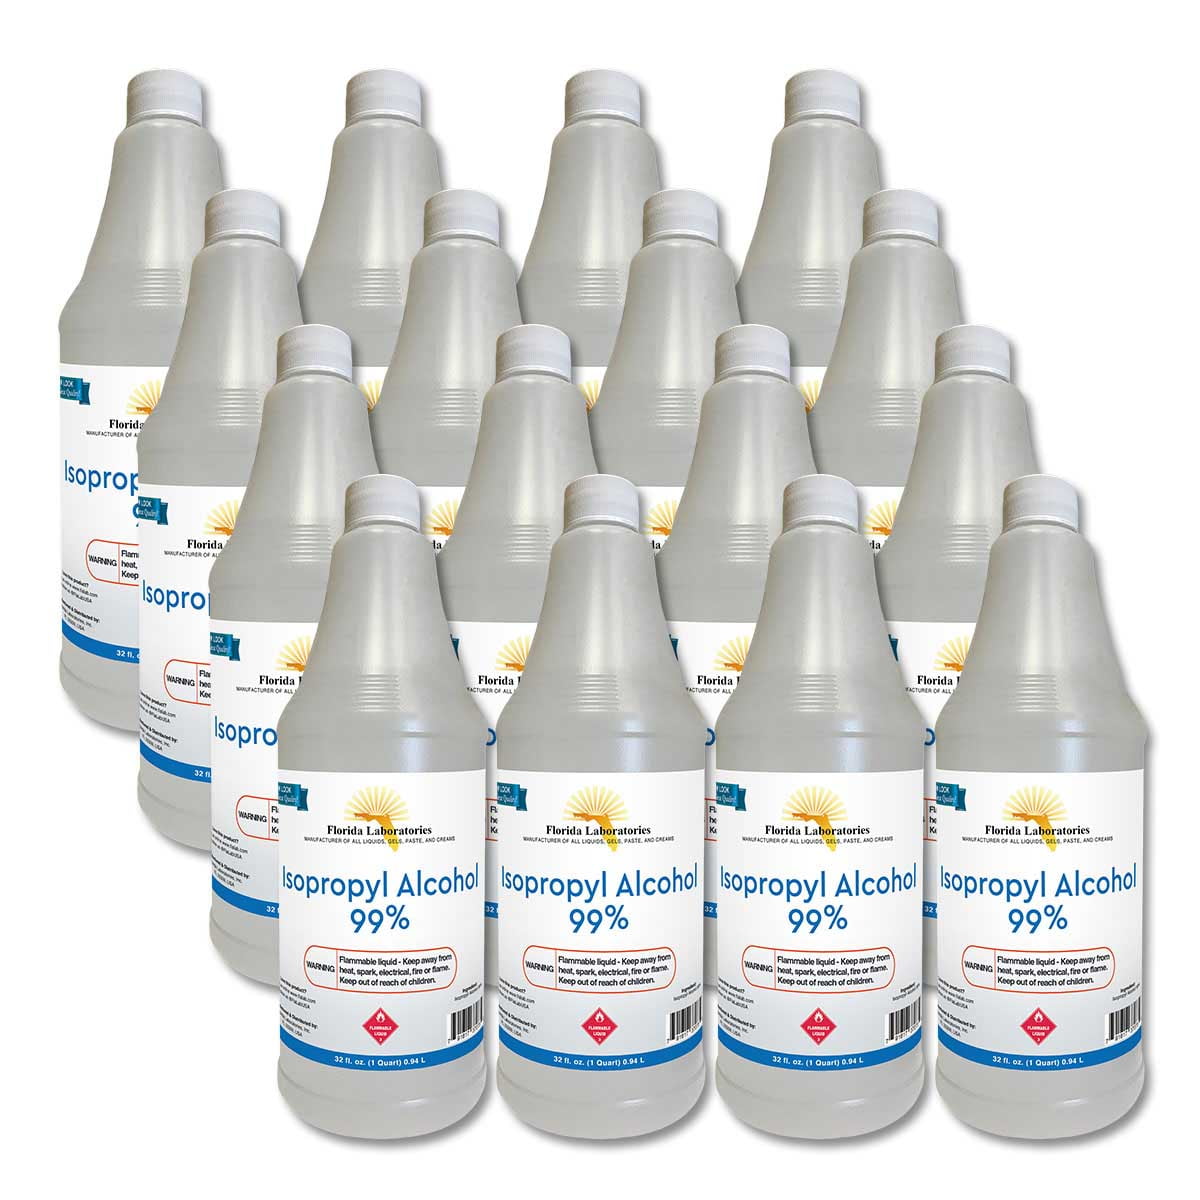  Isopropyl Alcohol 99% Travel Size Spray Bottles - 4 pack  (Portable 2.3oz Size) - Manufactured in the USA